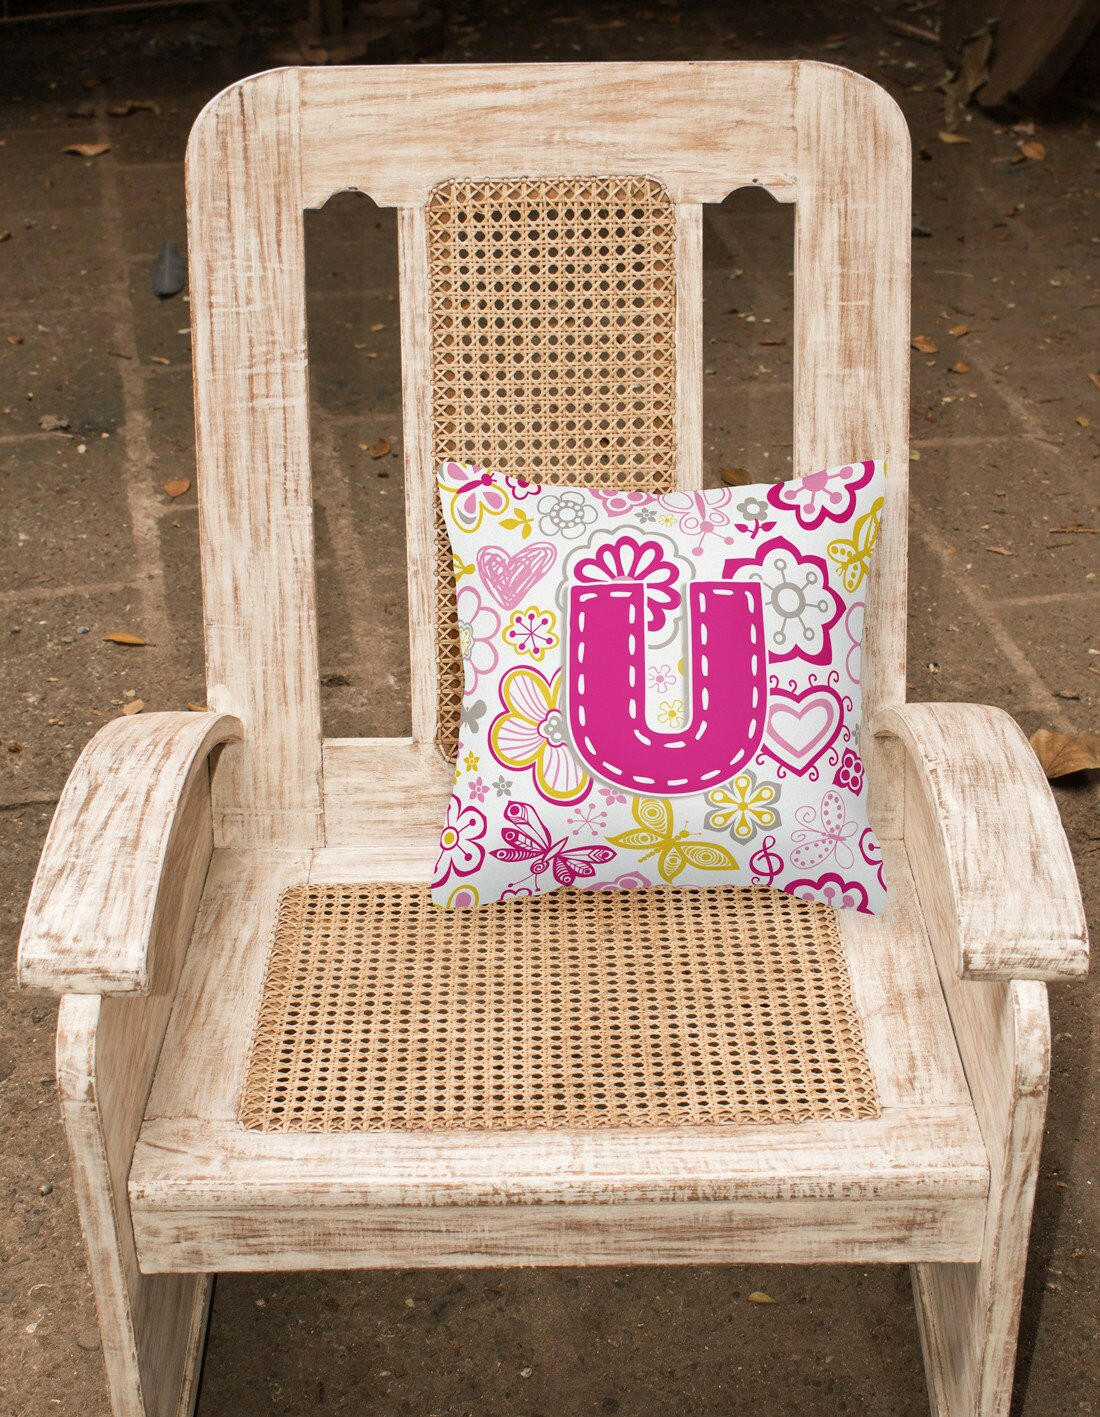 Letter U Flowers and Butterflies Pink Canvas Fabric Decorative Pillow CJ2005-UPW1414 by Caroline's Treasures